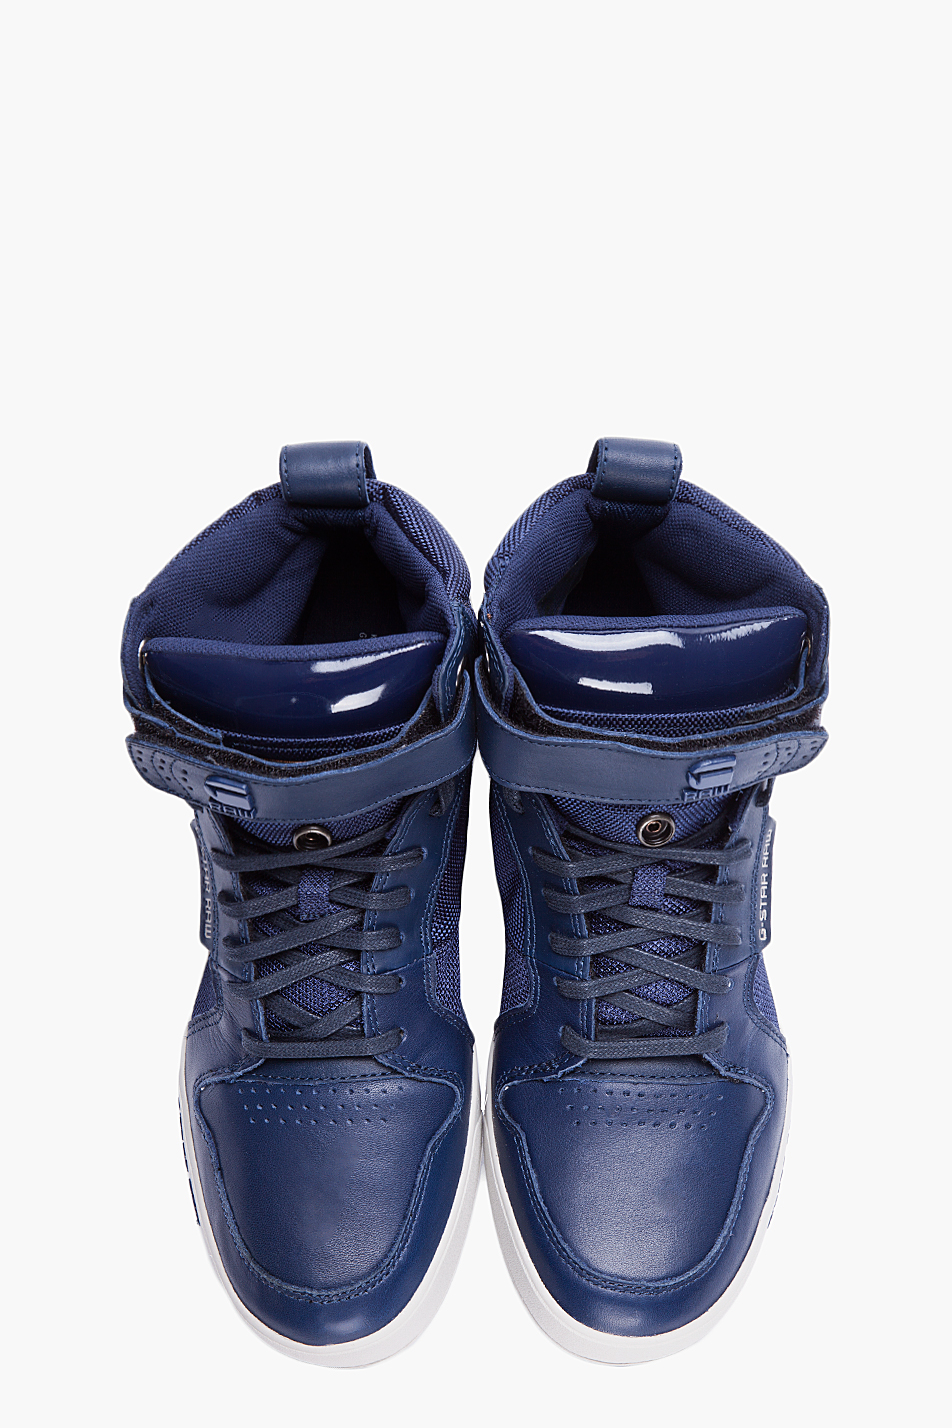 Lyst - G-Star Raw Navy Leather Yard Bullion Sneakers in Blue for Men